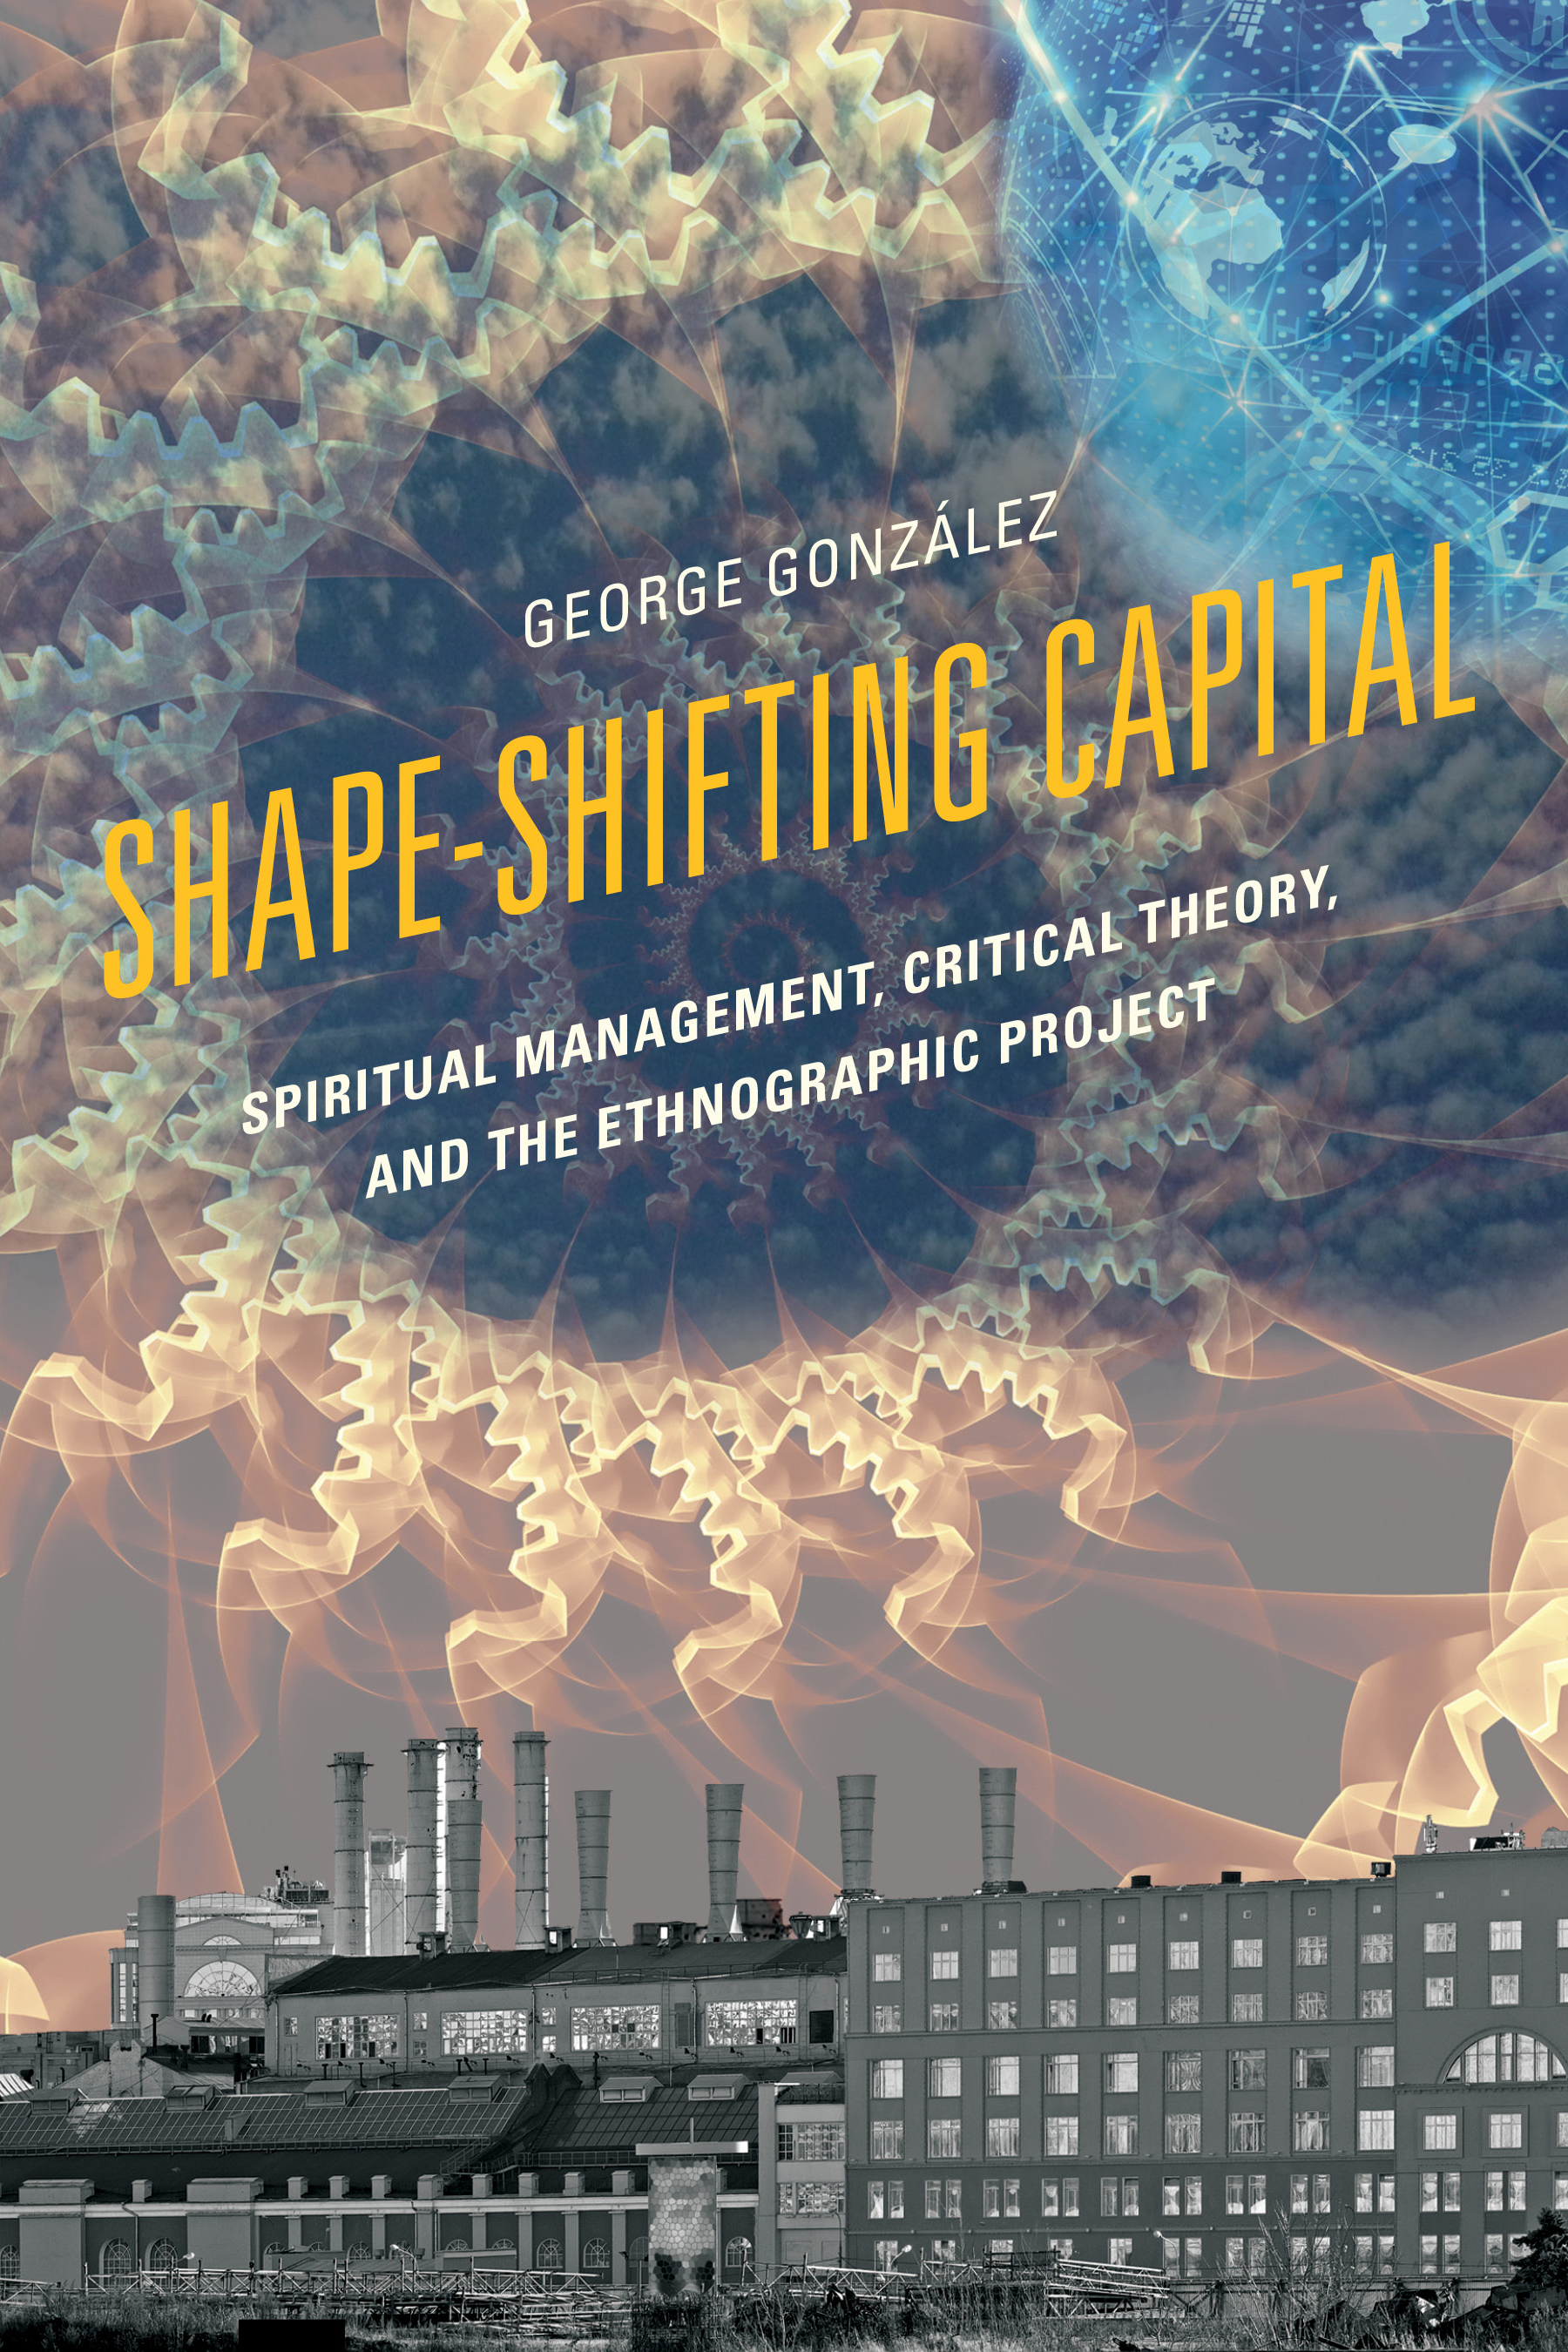 Shape-Shifting Capital: Spiritual Management, Critical Theory, and the Ethnographic Project